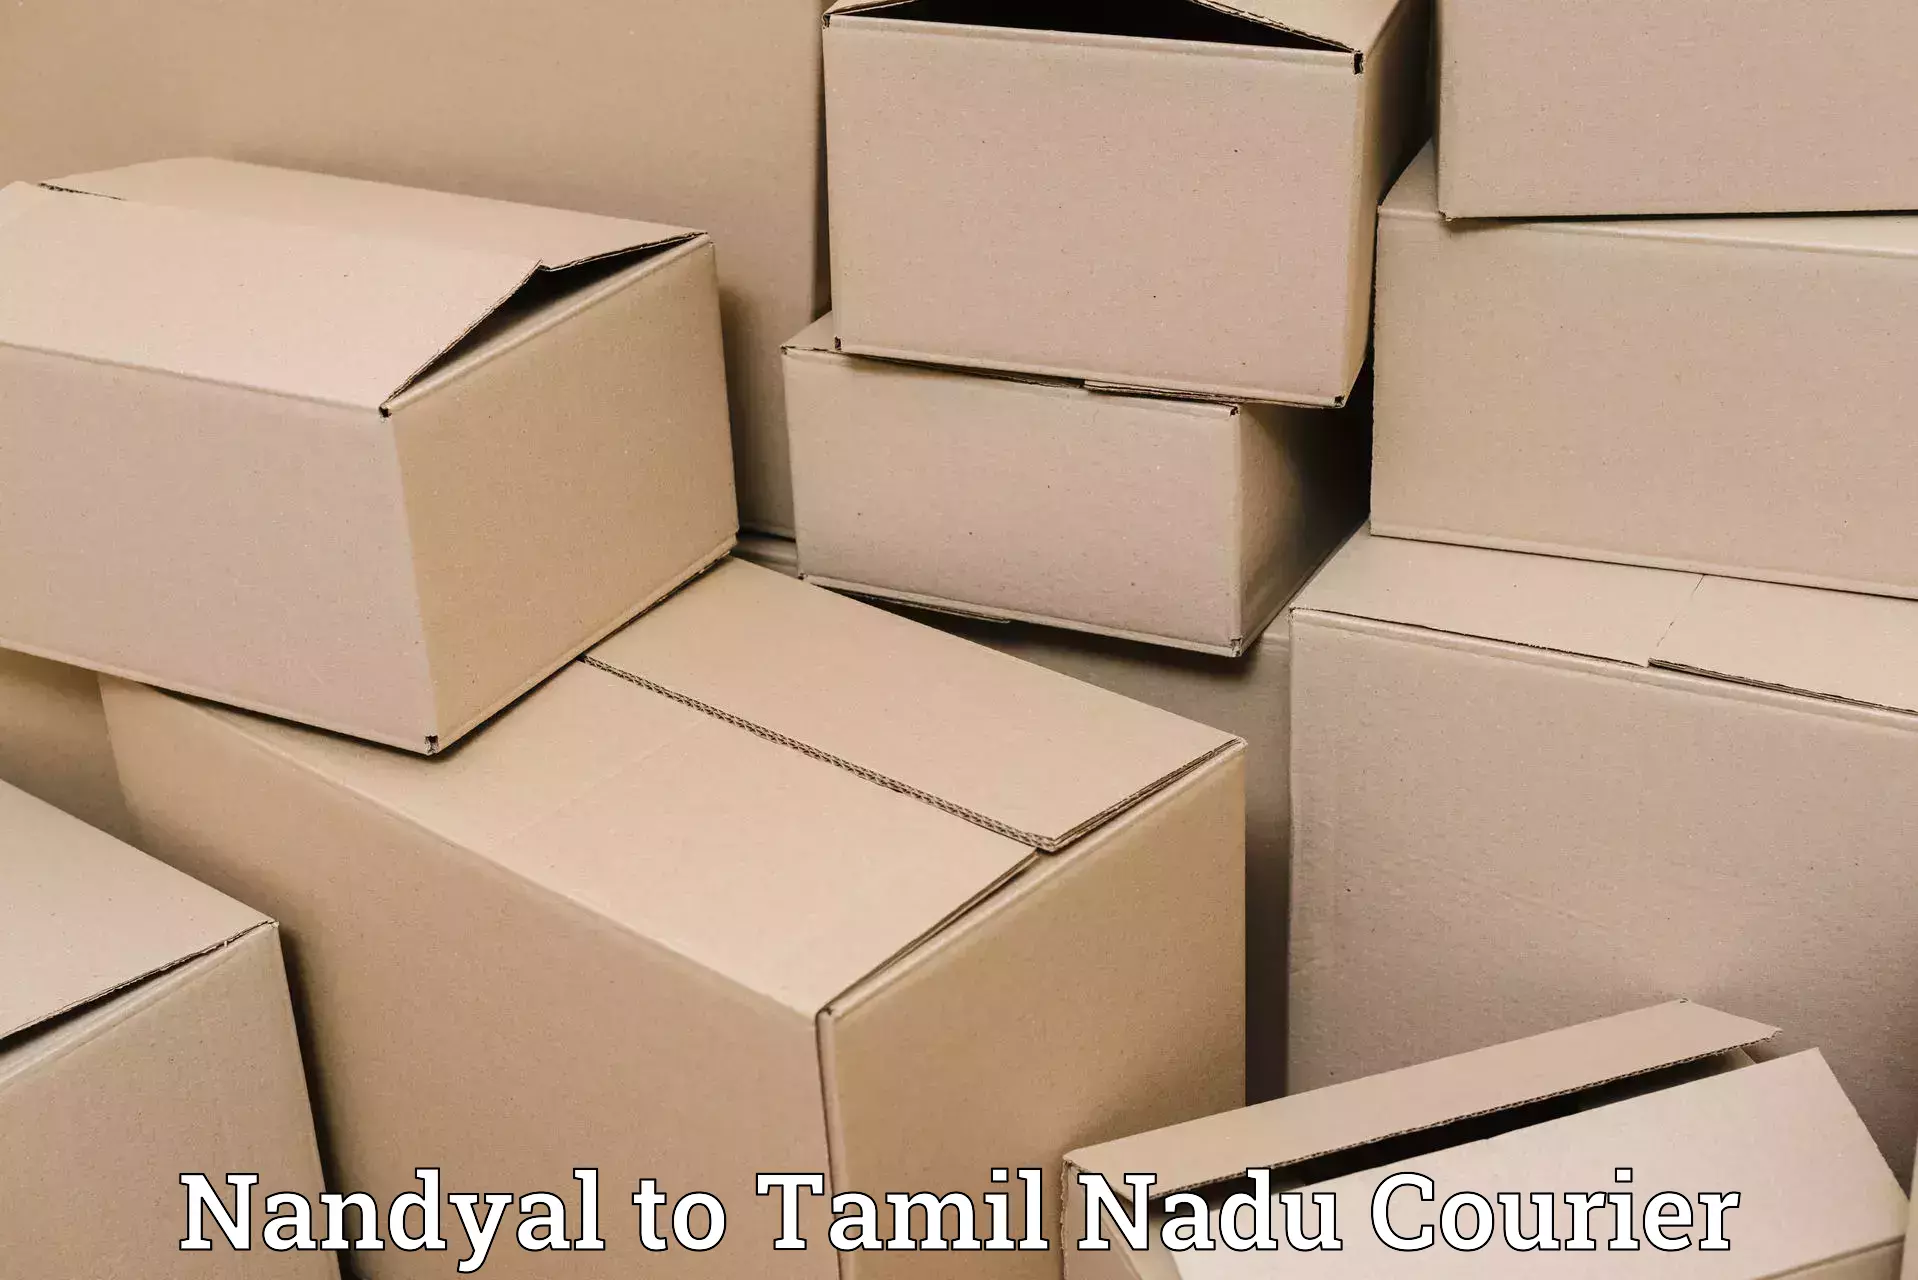 Flexible delivery scheduling Nandyal to Ambattur